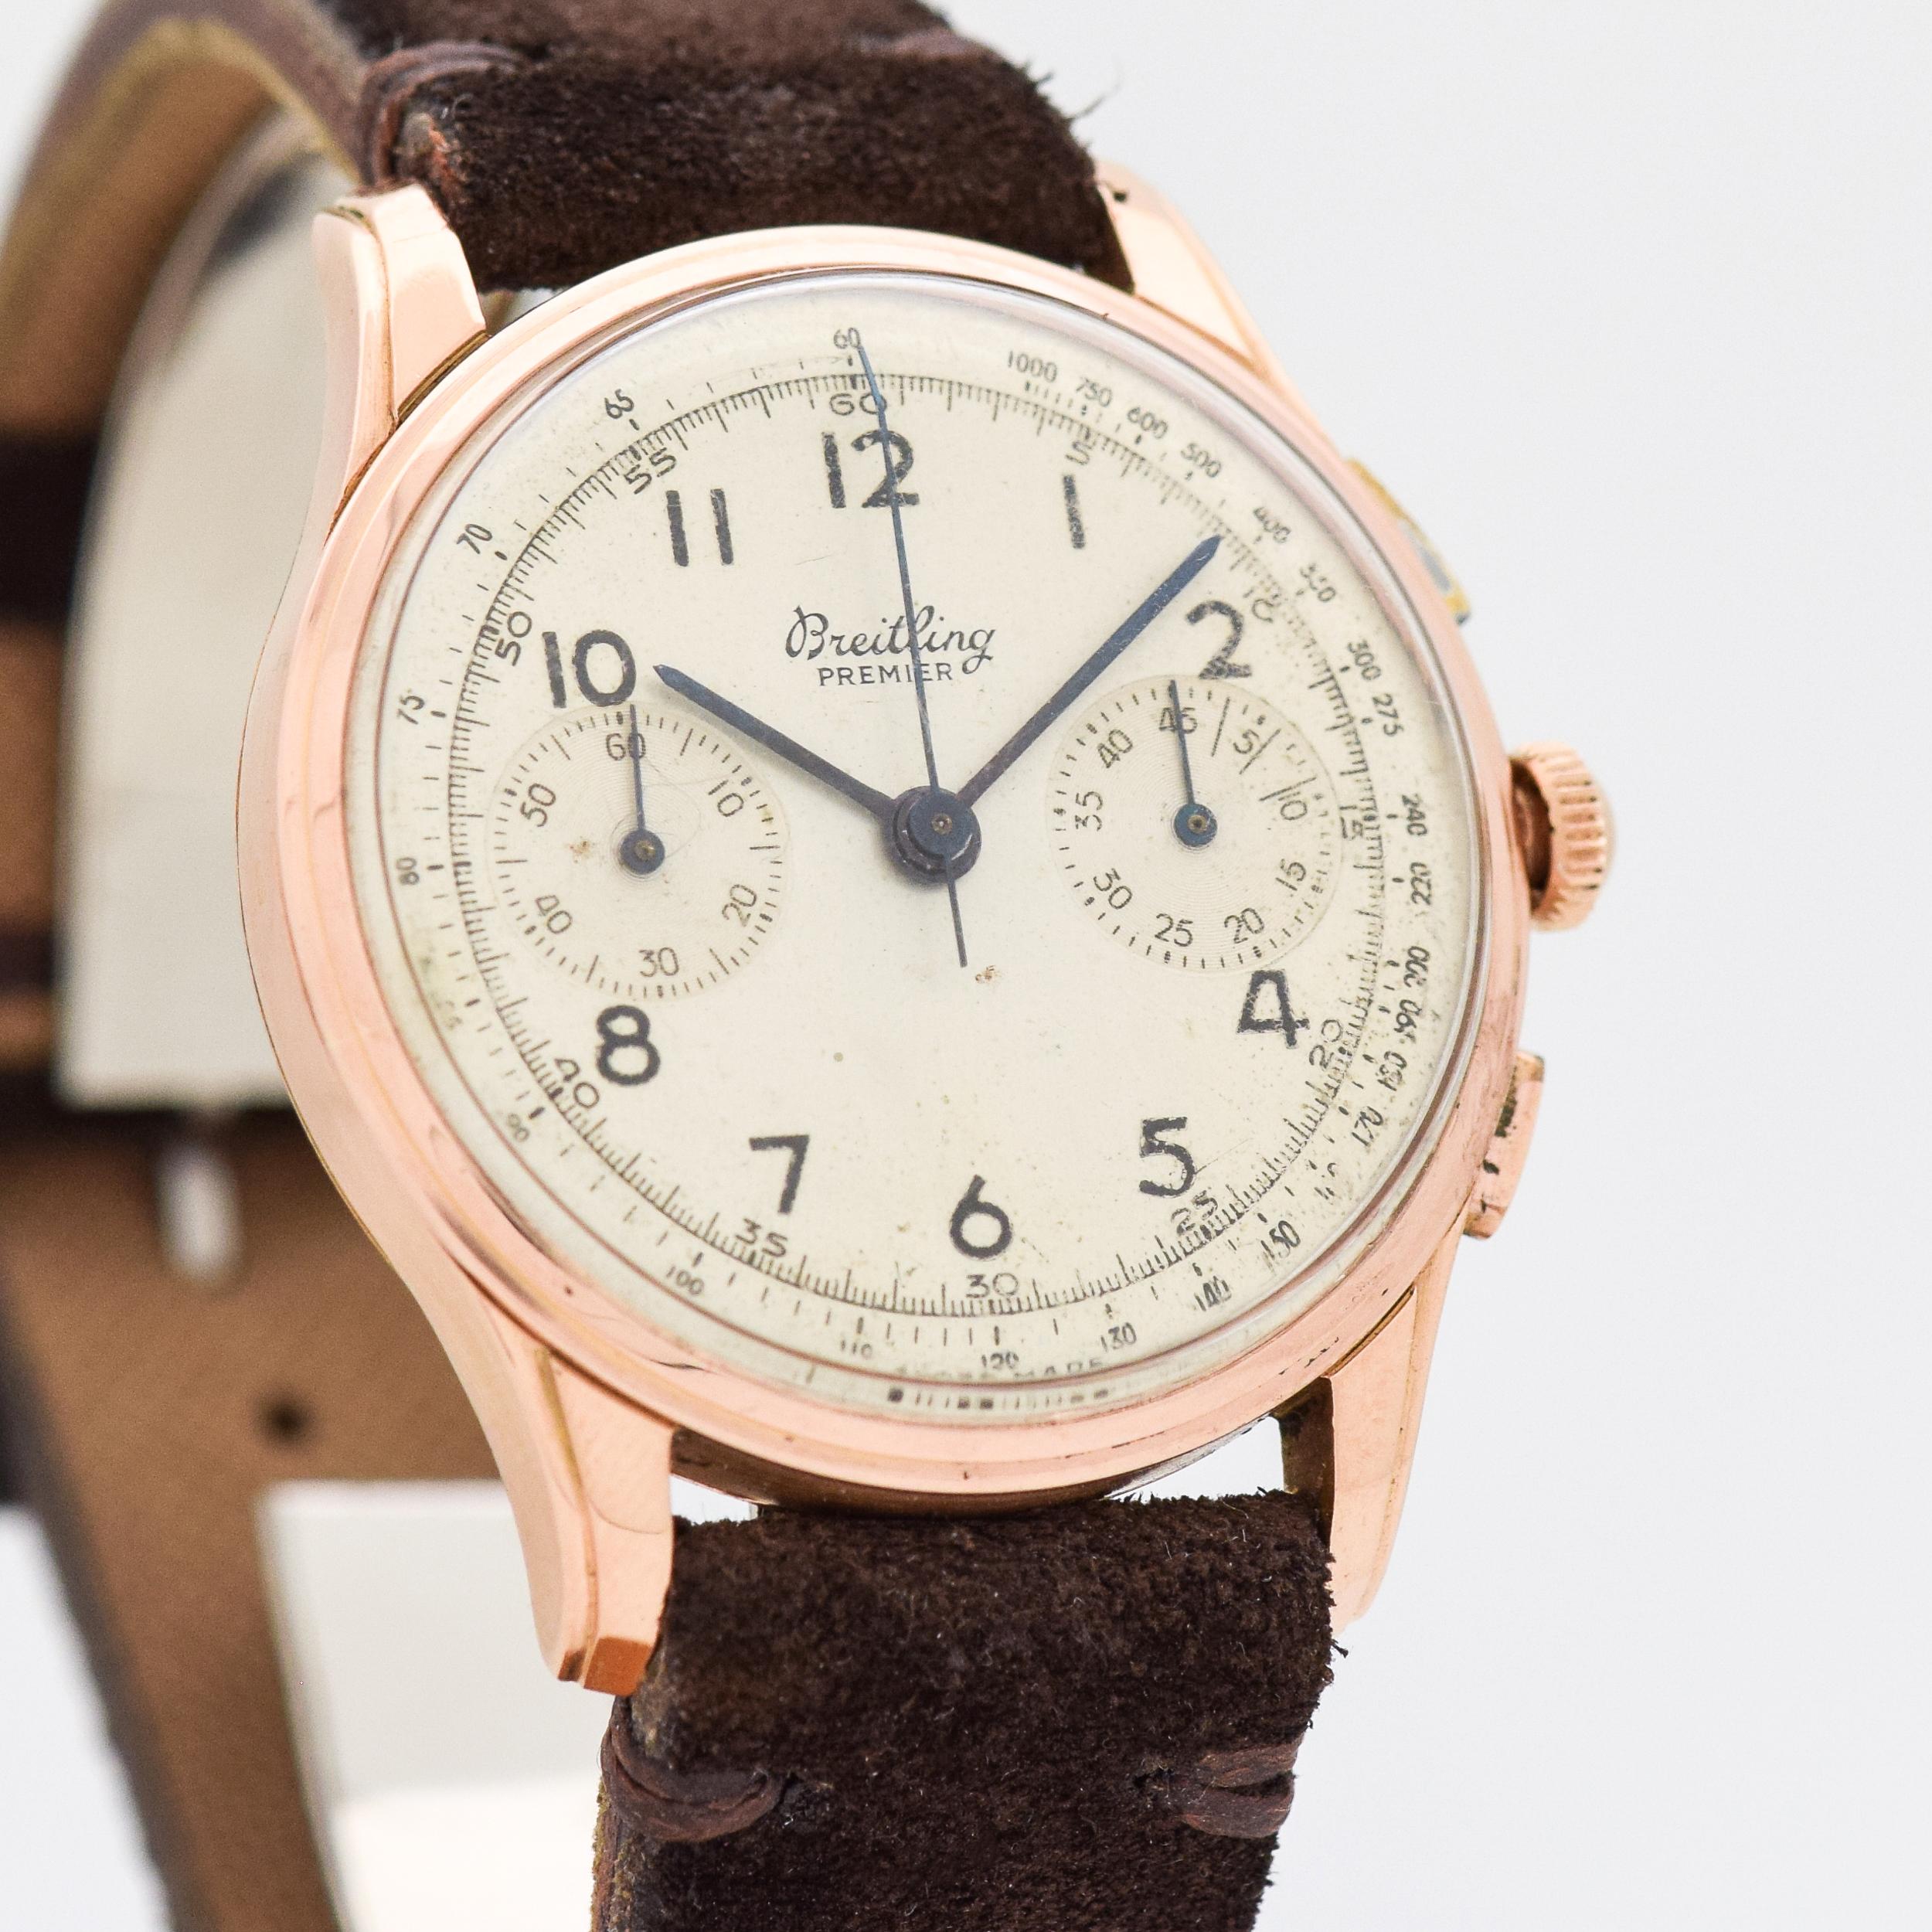 1946 Vintage Breitling Premier Ref. 782 18k Rose Gold watch with Original Silver Dial with Black Arabic Numbers. 36mm x 42mm lug to lug (1.42 in. x 1.65 in.) - 17 jewel, manual caliber Venus 175 movement. Sueded Genuine Leather Brown-colored Watch